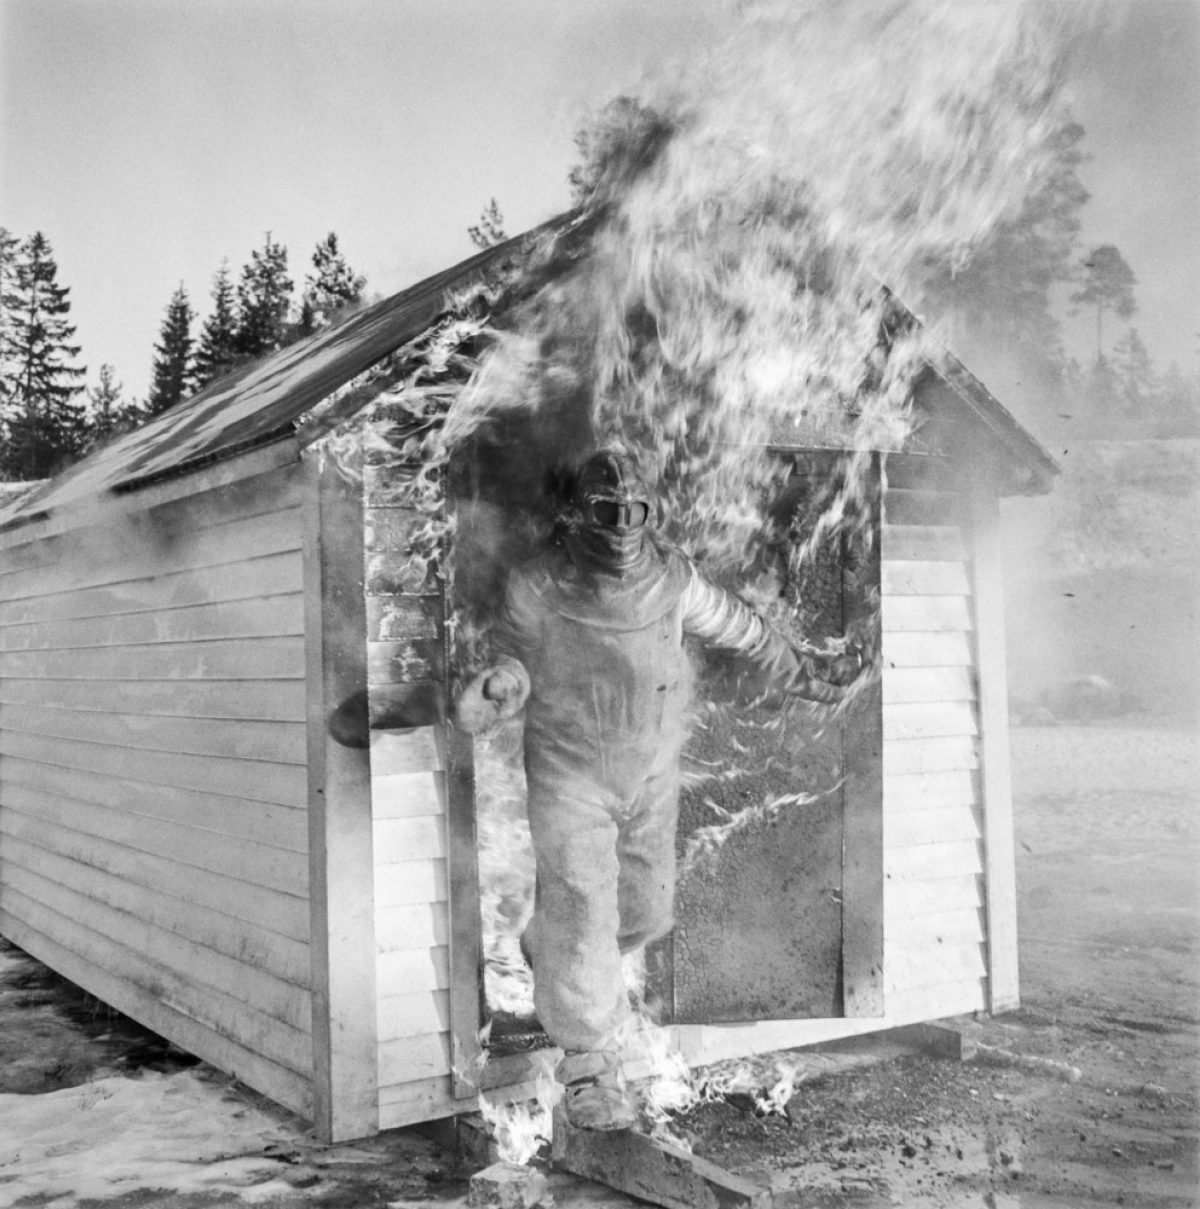 In 1957, Matti Jämsä tested the asbestos suit belonging to Suomen Mineraali. He remained in the flames for so long that the assistants began to fear for the worse. Photo: UA Saarinen / Press Photo Archive JOKA / Finnish Heritage Agency